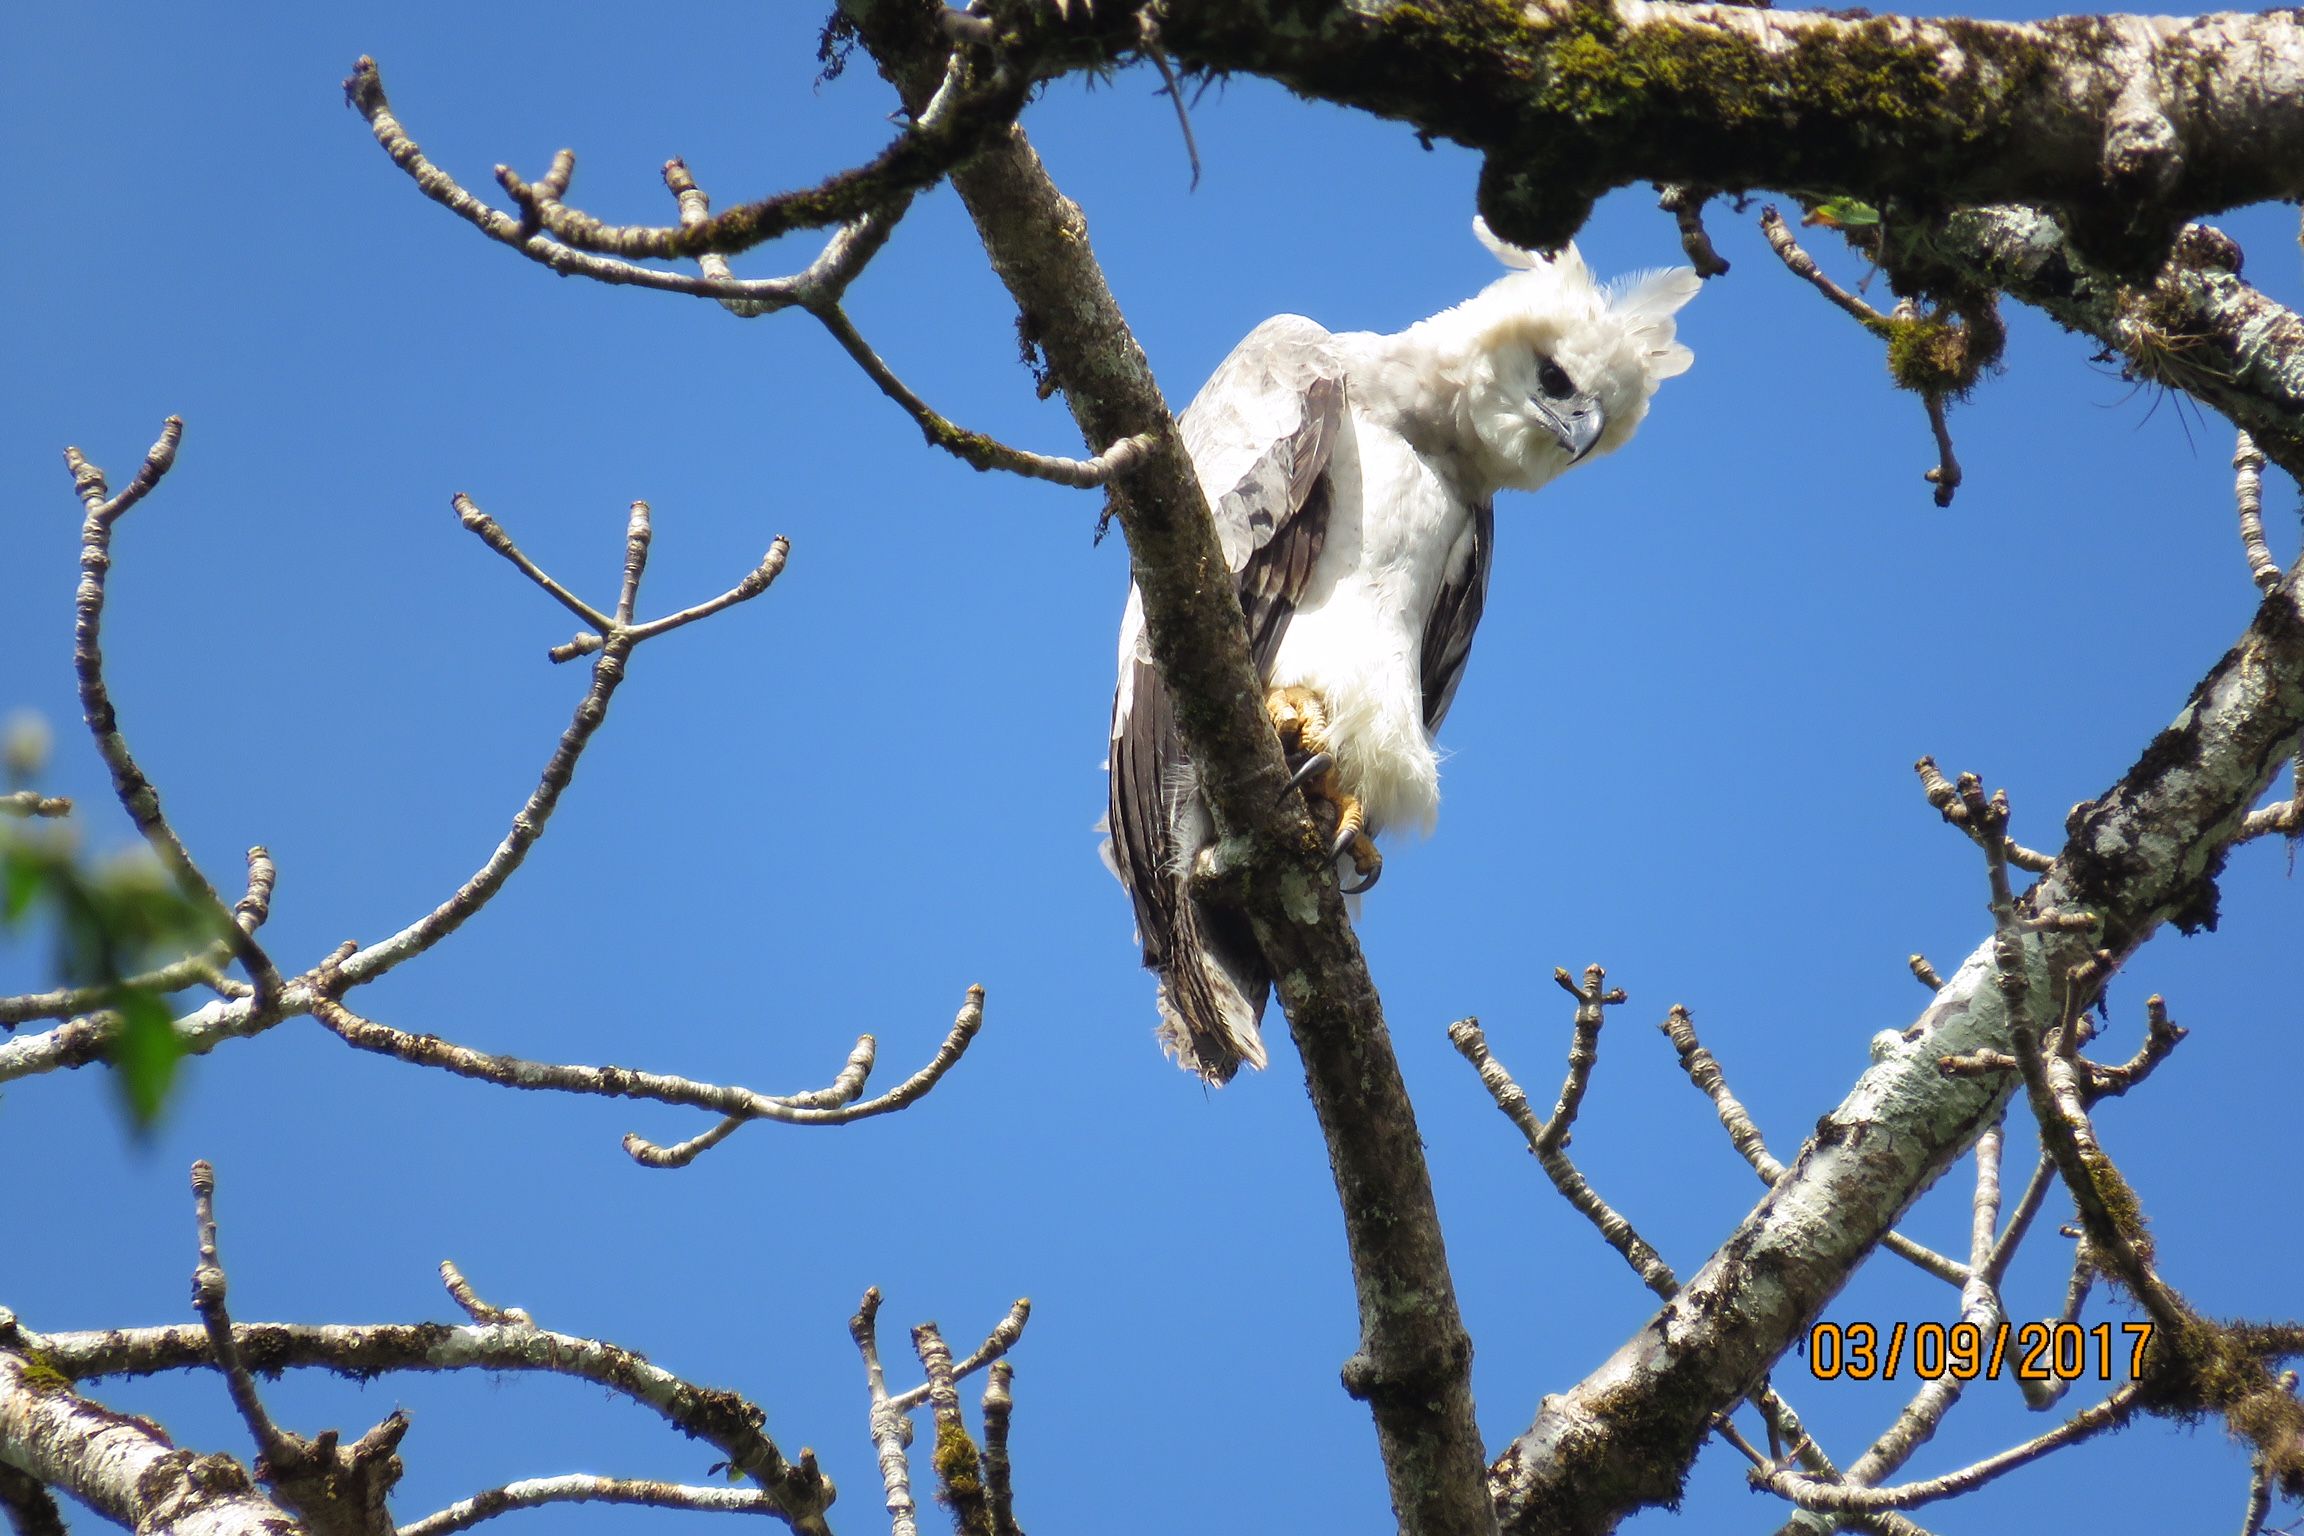 birding guides are the best way to see birds like harpy eagle